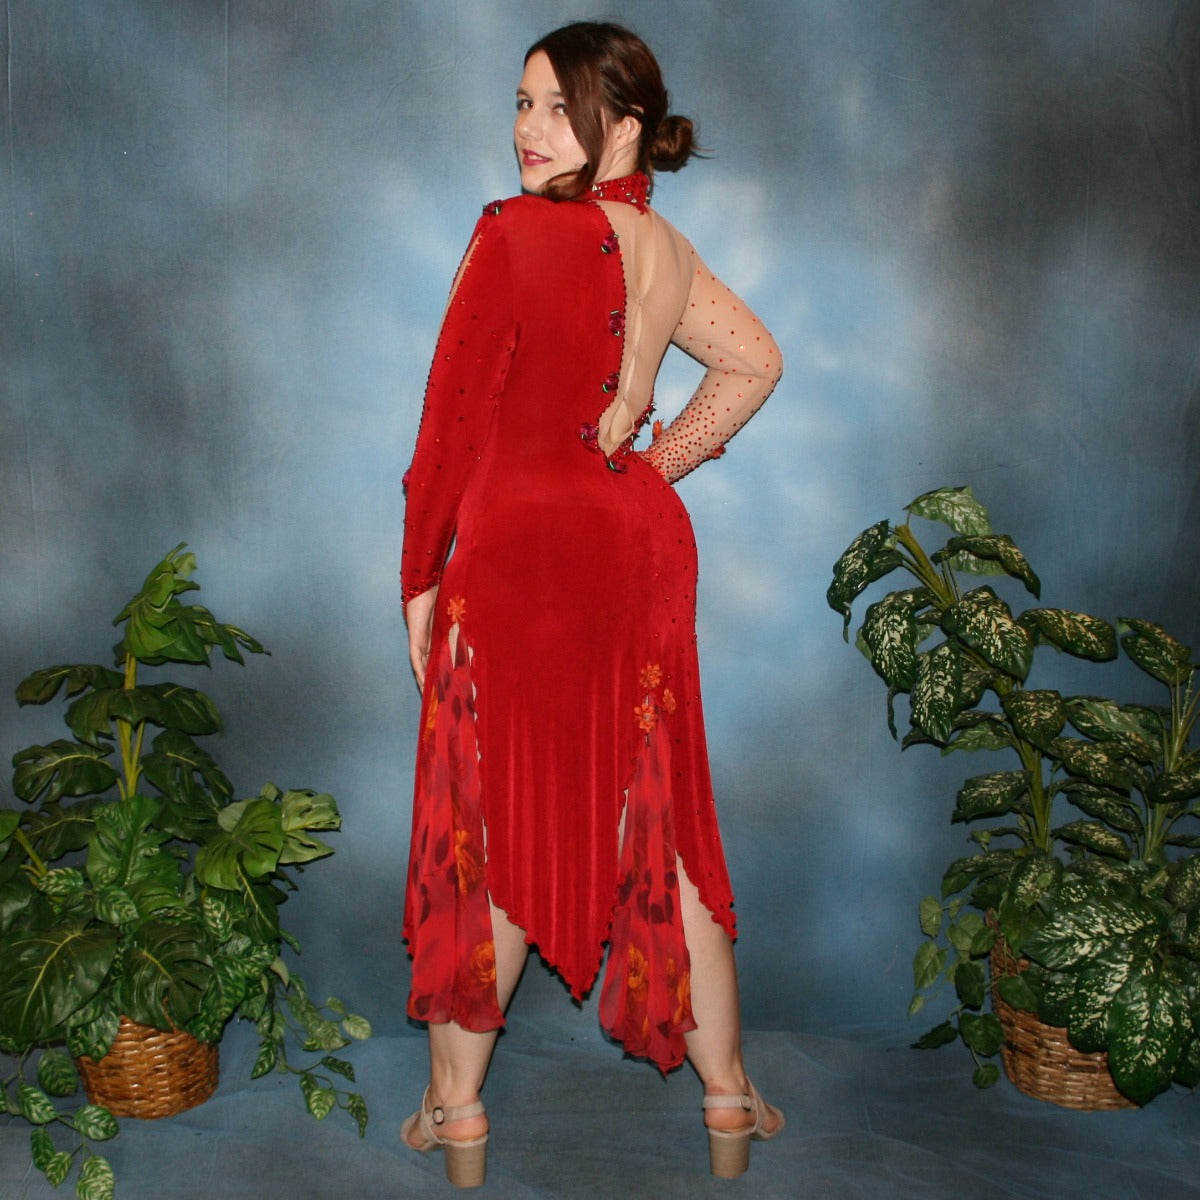 side back view of Red Latin/rhythm dance dress created in luxurious red solid slinky over nude illusion base with printed chiffon insets in skirting, is embellished with ruby & hyacinth Swarovski rhinestones plus silk roses.